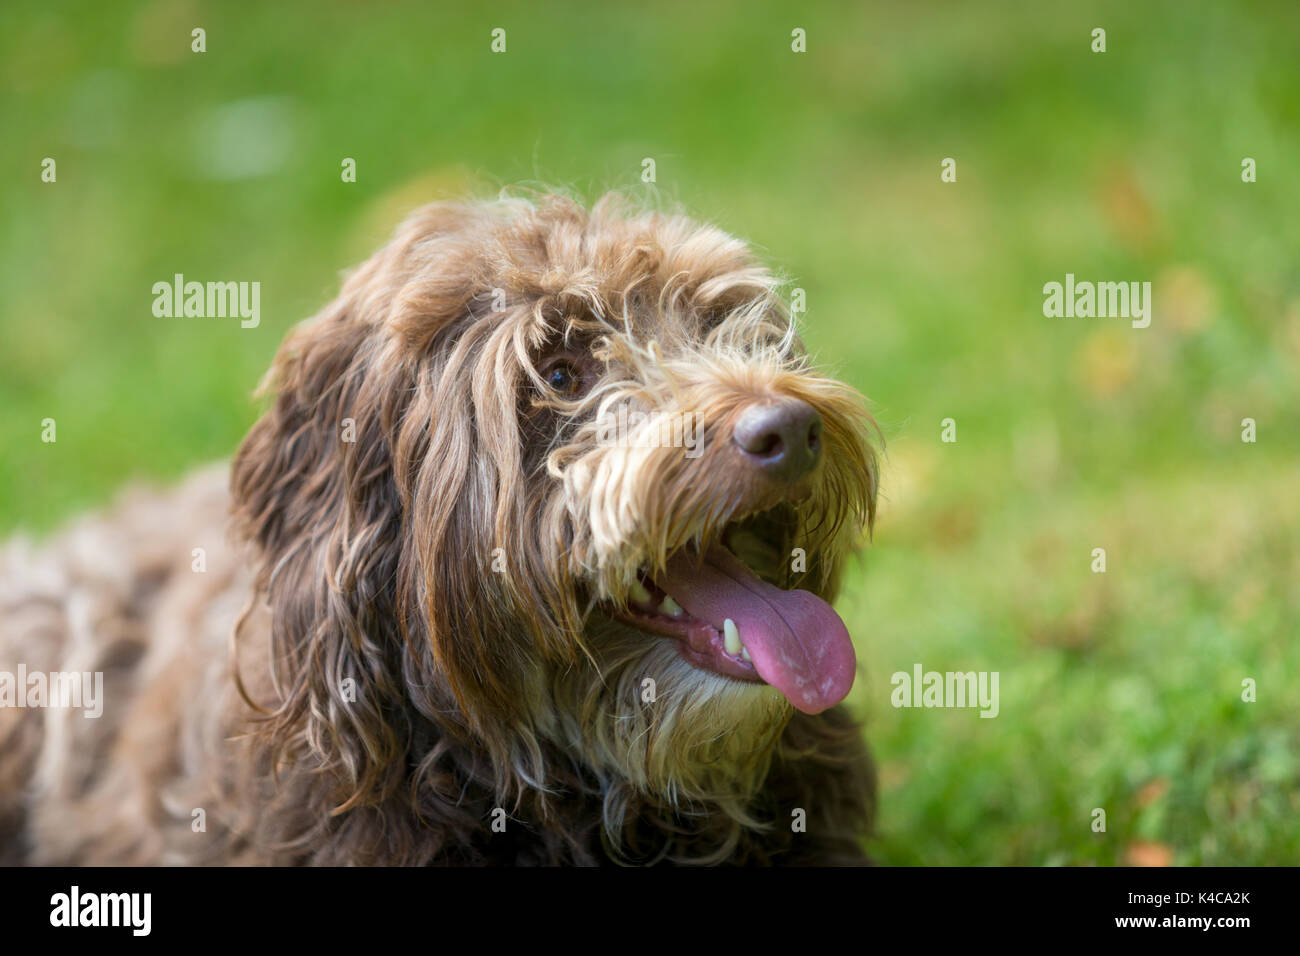 Head and face of a Border collie and poodle mix bred dog Stock Photo